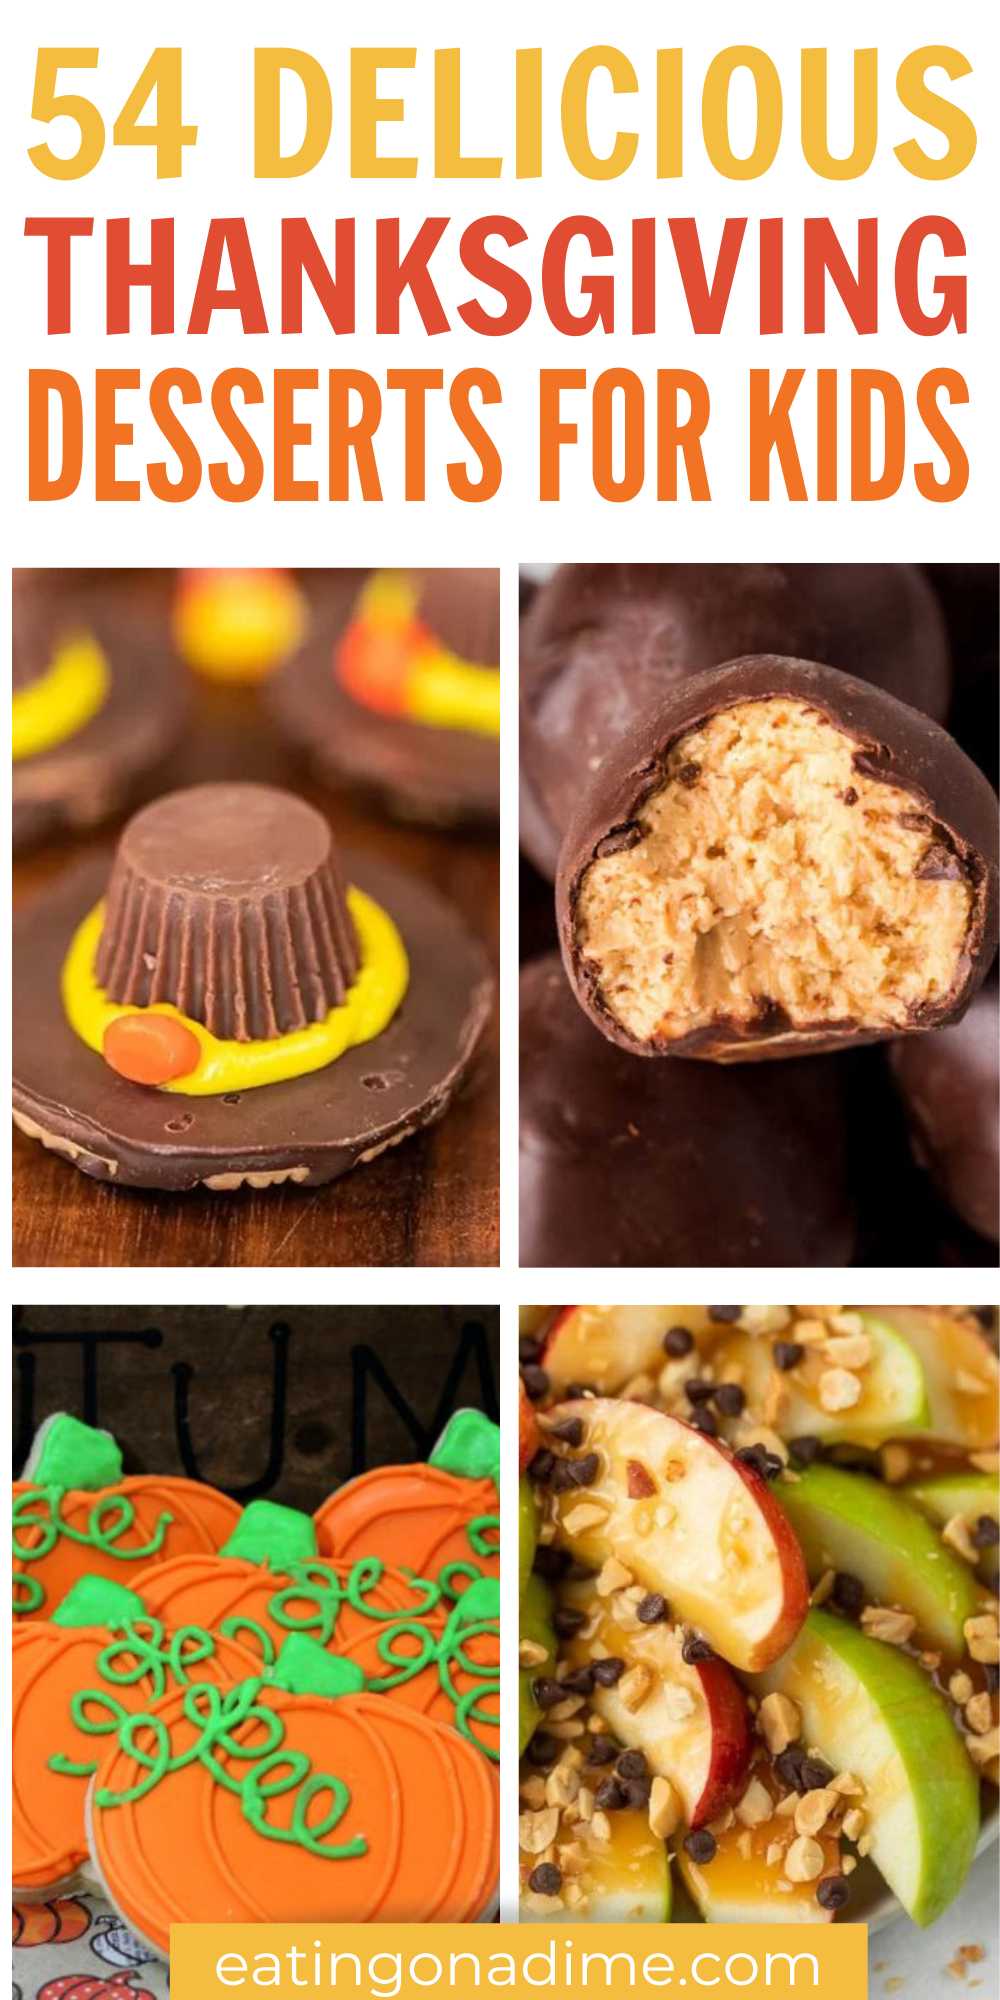 Make Thanksgiving memorable for the whole family by following these easy Thanksgiving desserts for kids. These easy-to-follow recipes will make the cooking part of Thanksgiving exciting and fun. From turkey Oreo cookies to the classic pie, we’ve prepared easy Thanksgiving desserts for kids. #eatingonadime #thanksgivingdessertsforkids #dessertsforkids